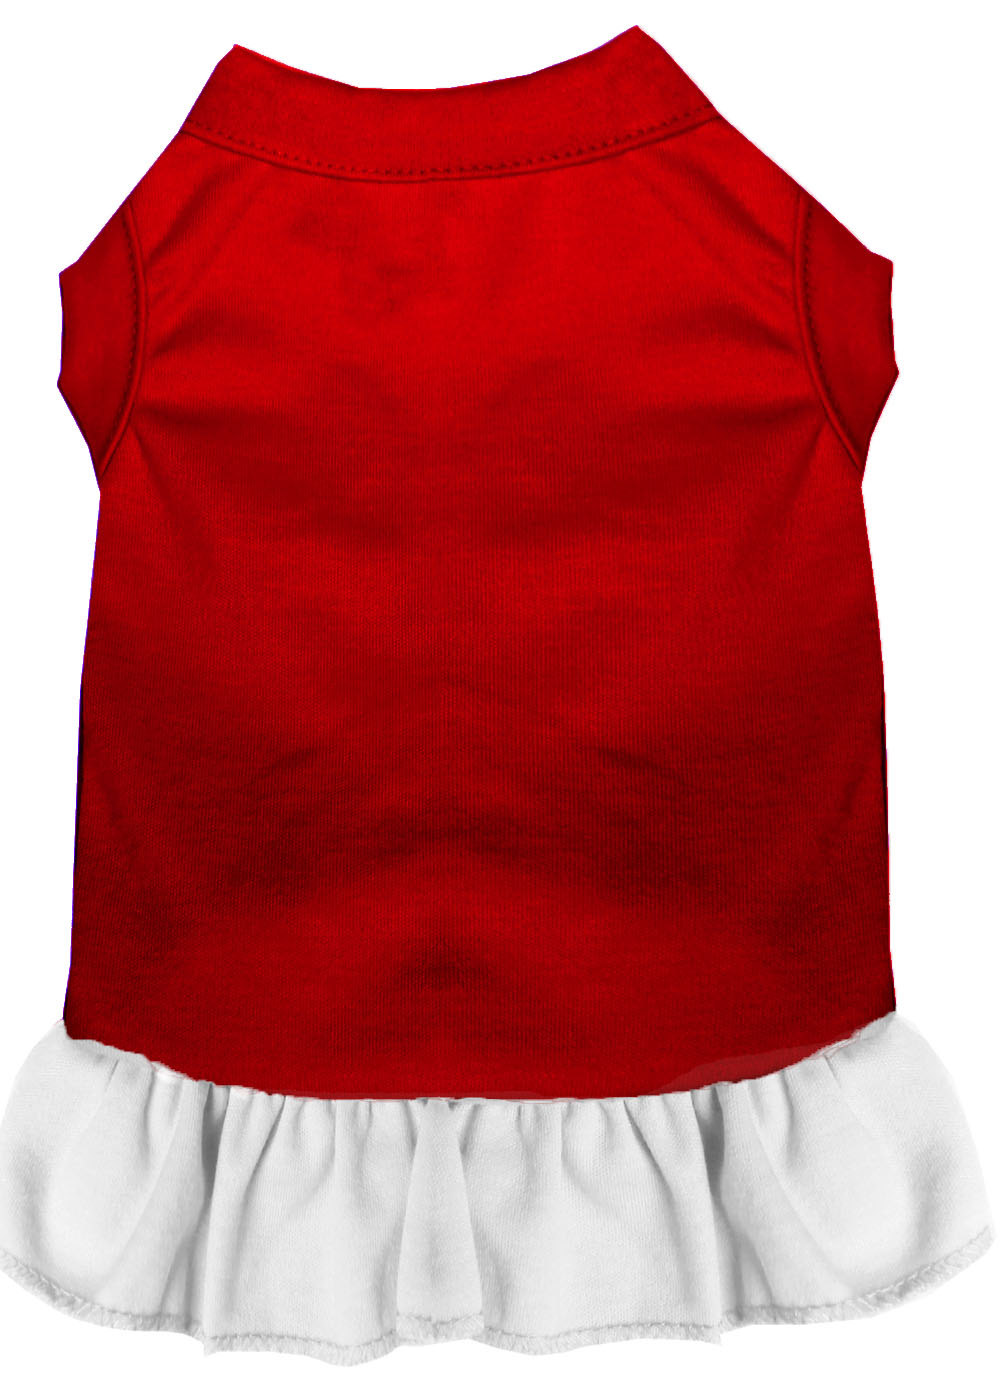 Plain Pet Dress Red with White XS